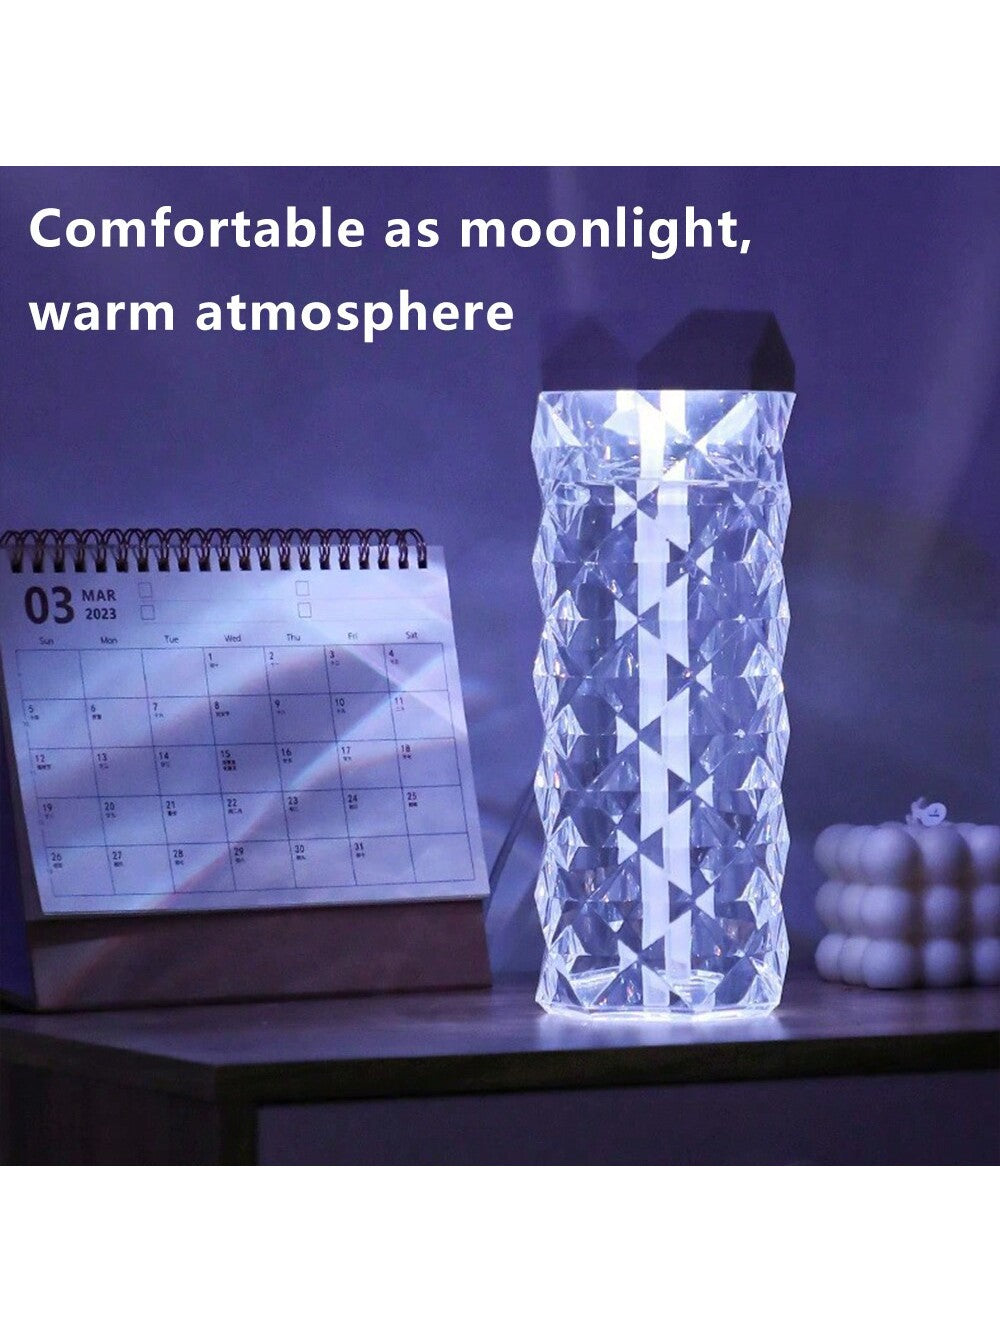 Crystal humidifier home small quiet colorful atmosphere bedroom desktop car USB humidifier high appearance level atmosphere light, bedroom bedside night light air humidifier home quiet bedroom fog amount student dormitory-White-9